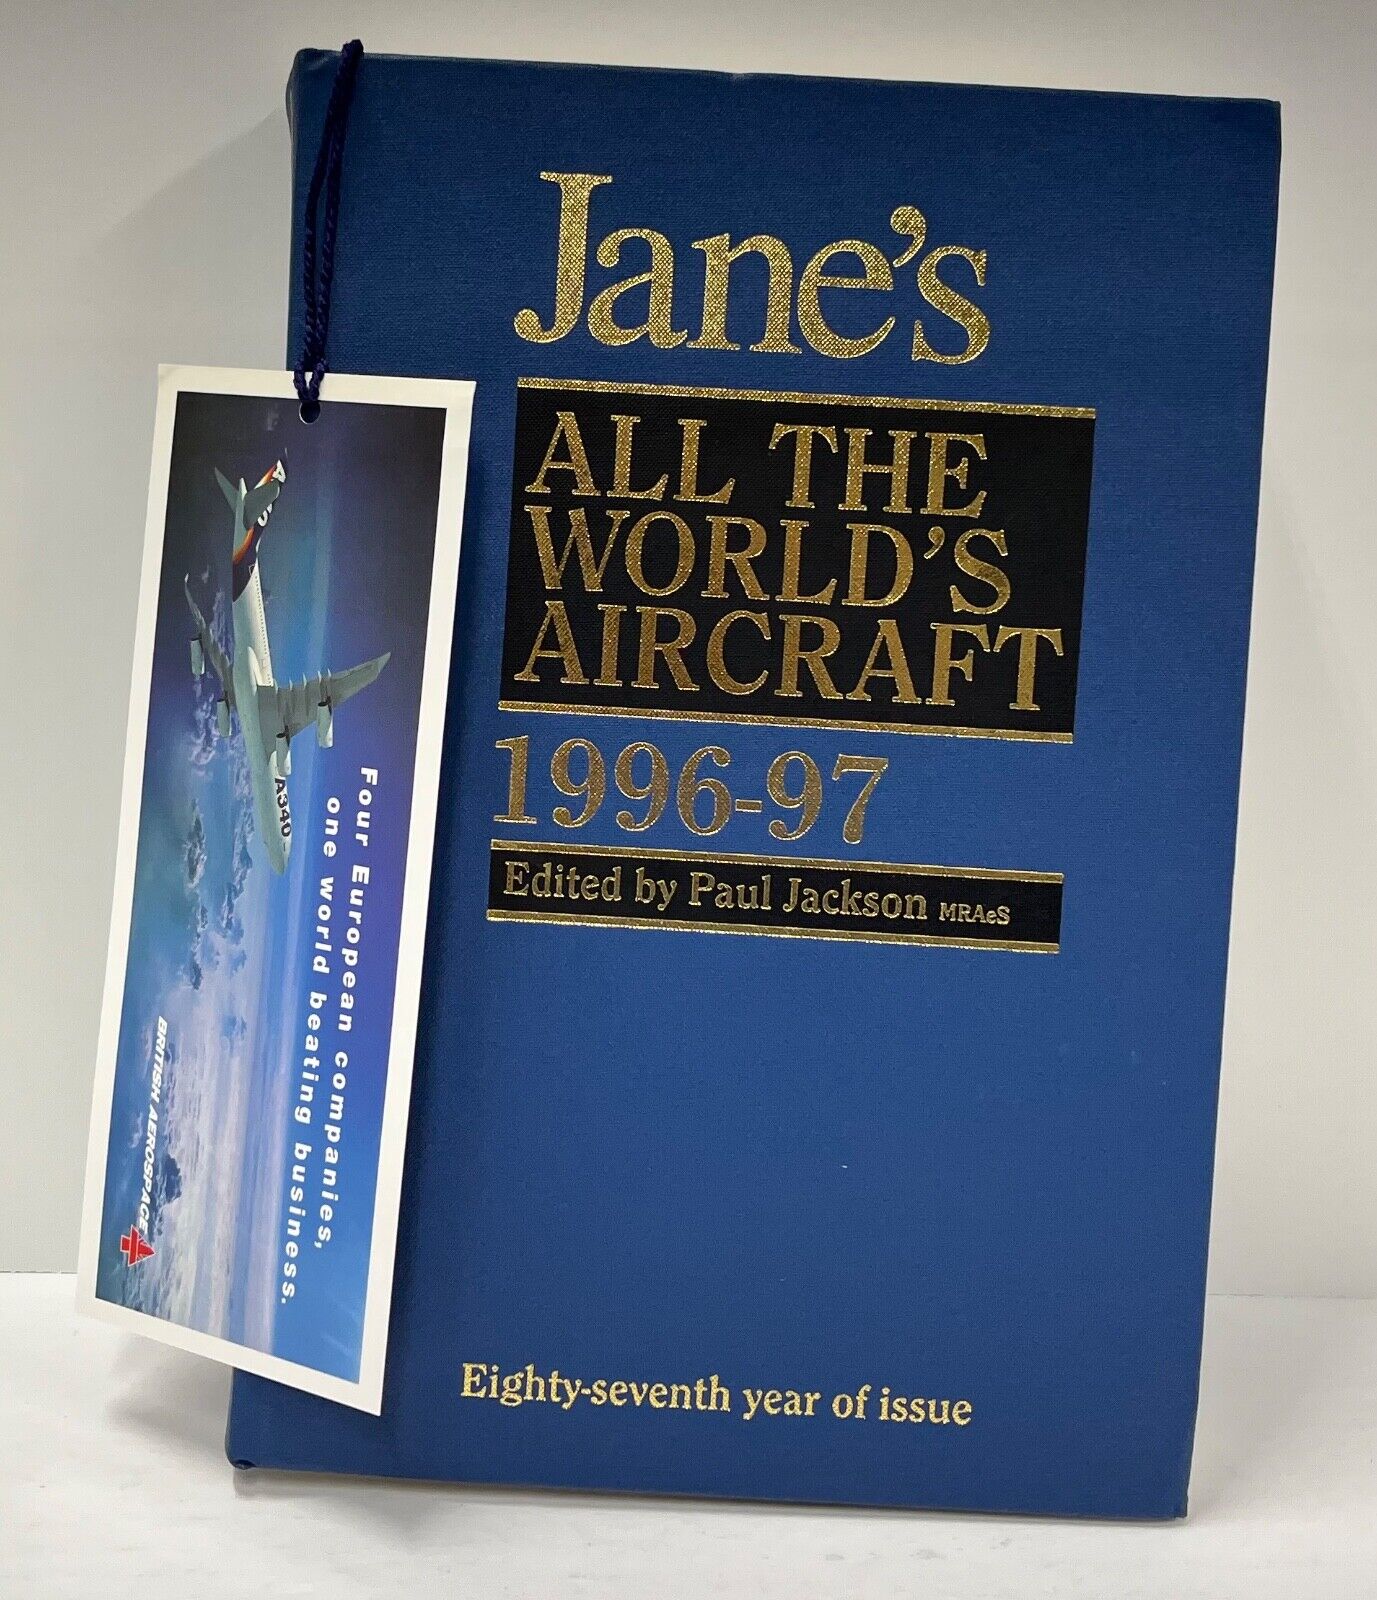 Jane's ALL THE WORLD'S AIRCRAFT 1996-97